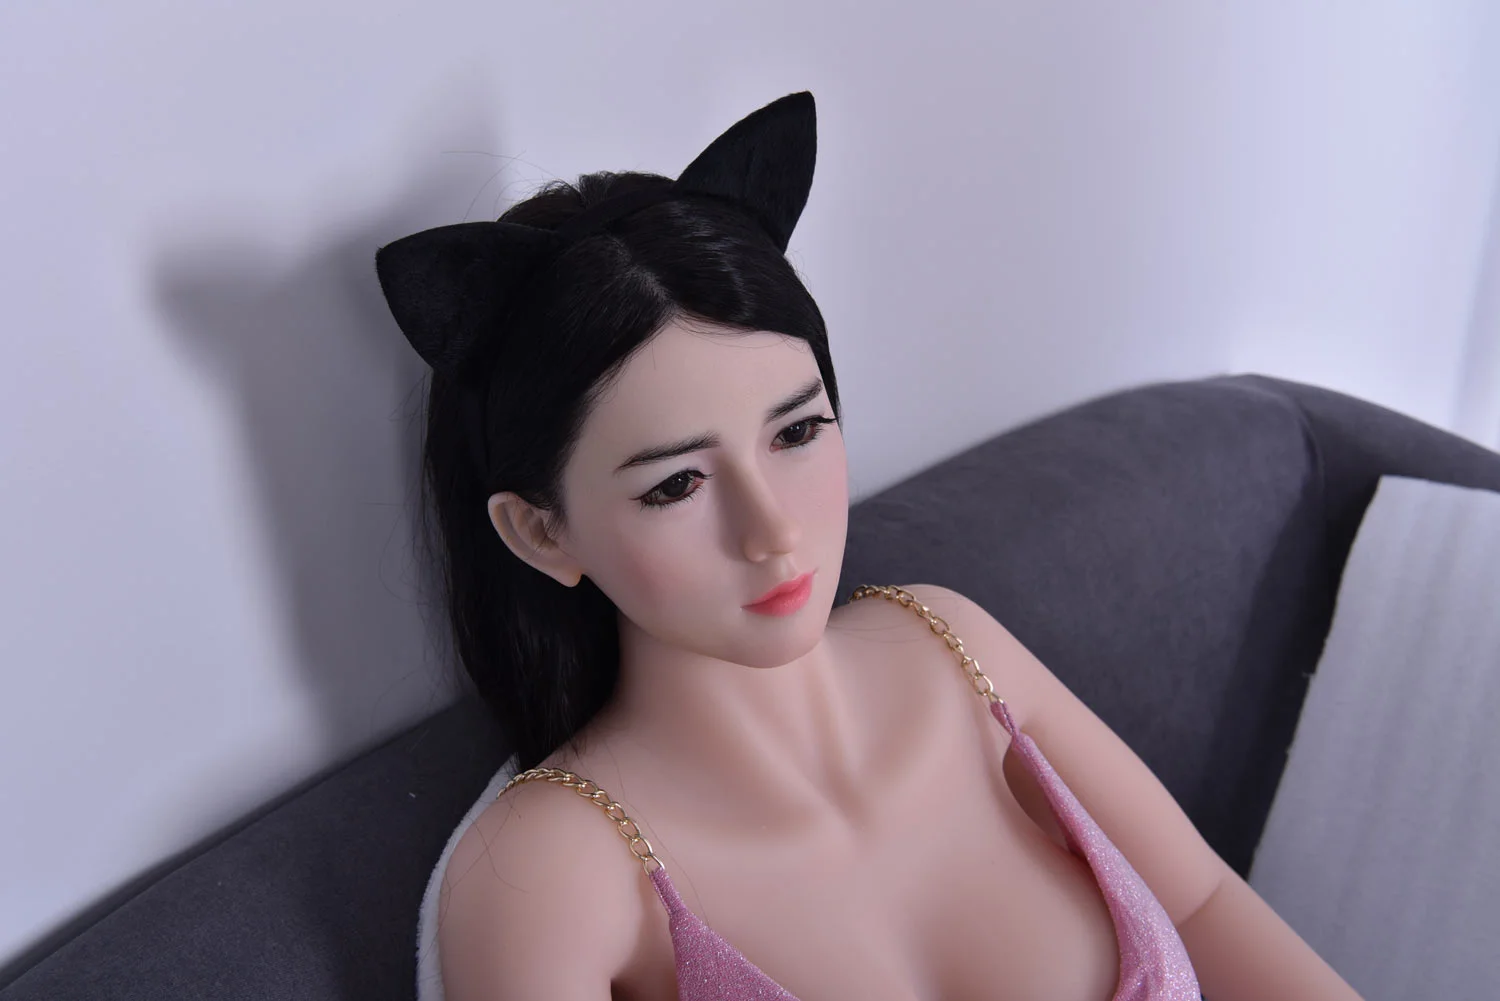 Sex doll with cat ears hair band